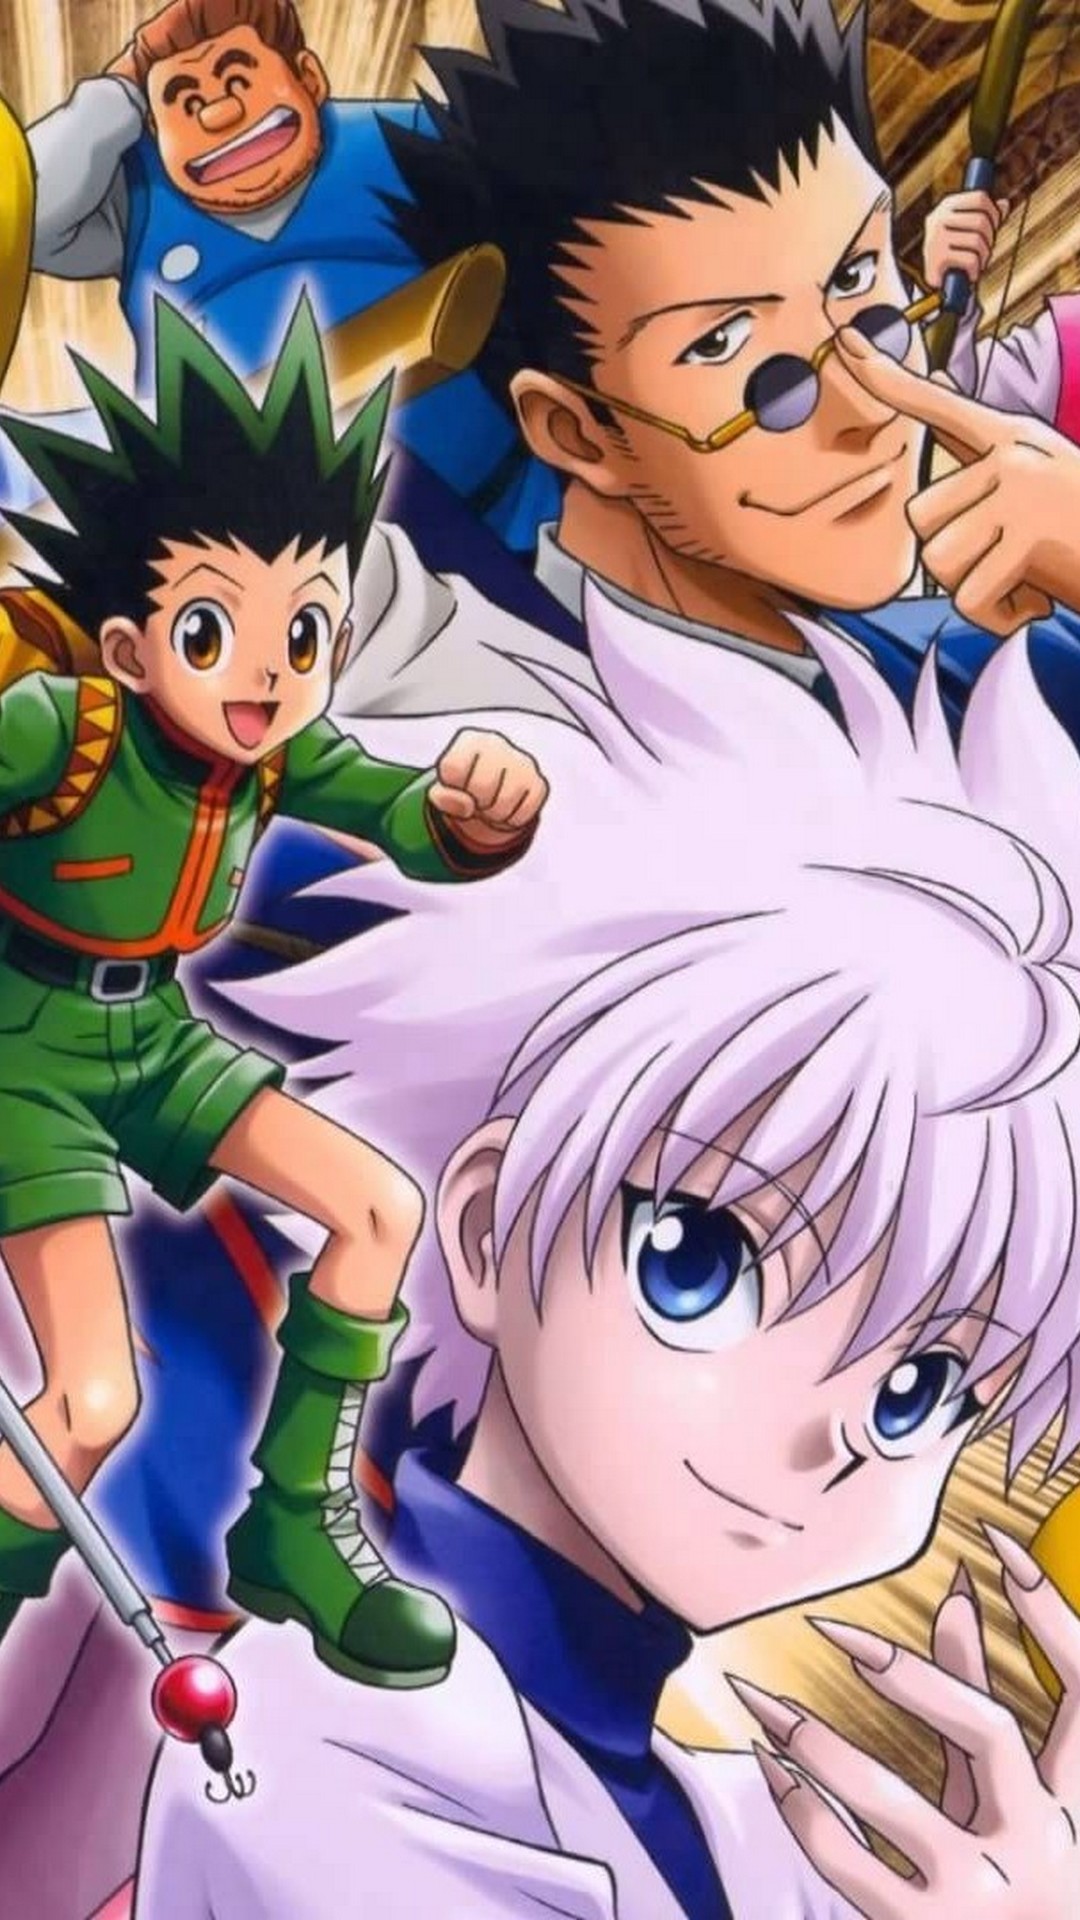 Gon And Killua Wallpaper For Android With high-resolution 1080X1920 pixel. You can use this wallpaper for your Android backgrounds, Tablet, Samsung Screensavers, Mobile Phone Lock Screen and another Smartphones device